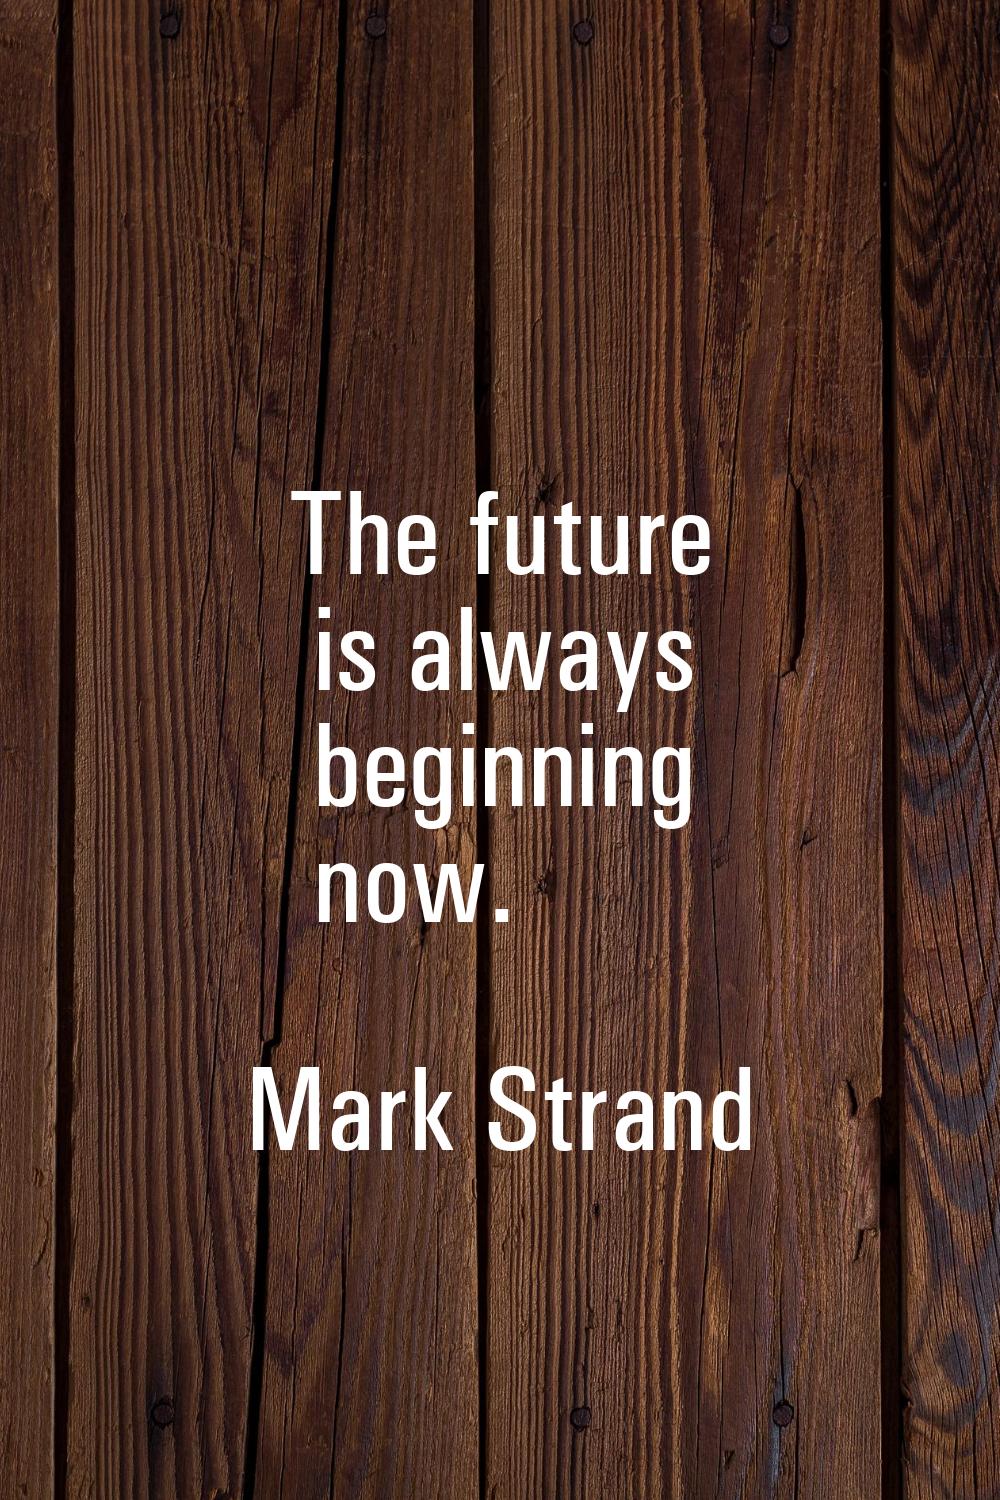 The future is always beginning now.